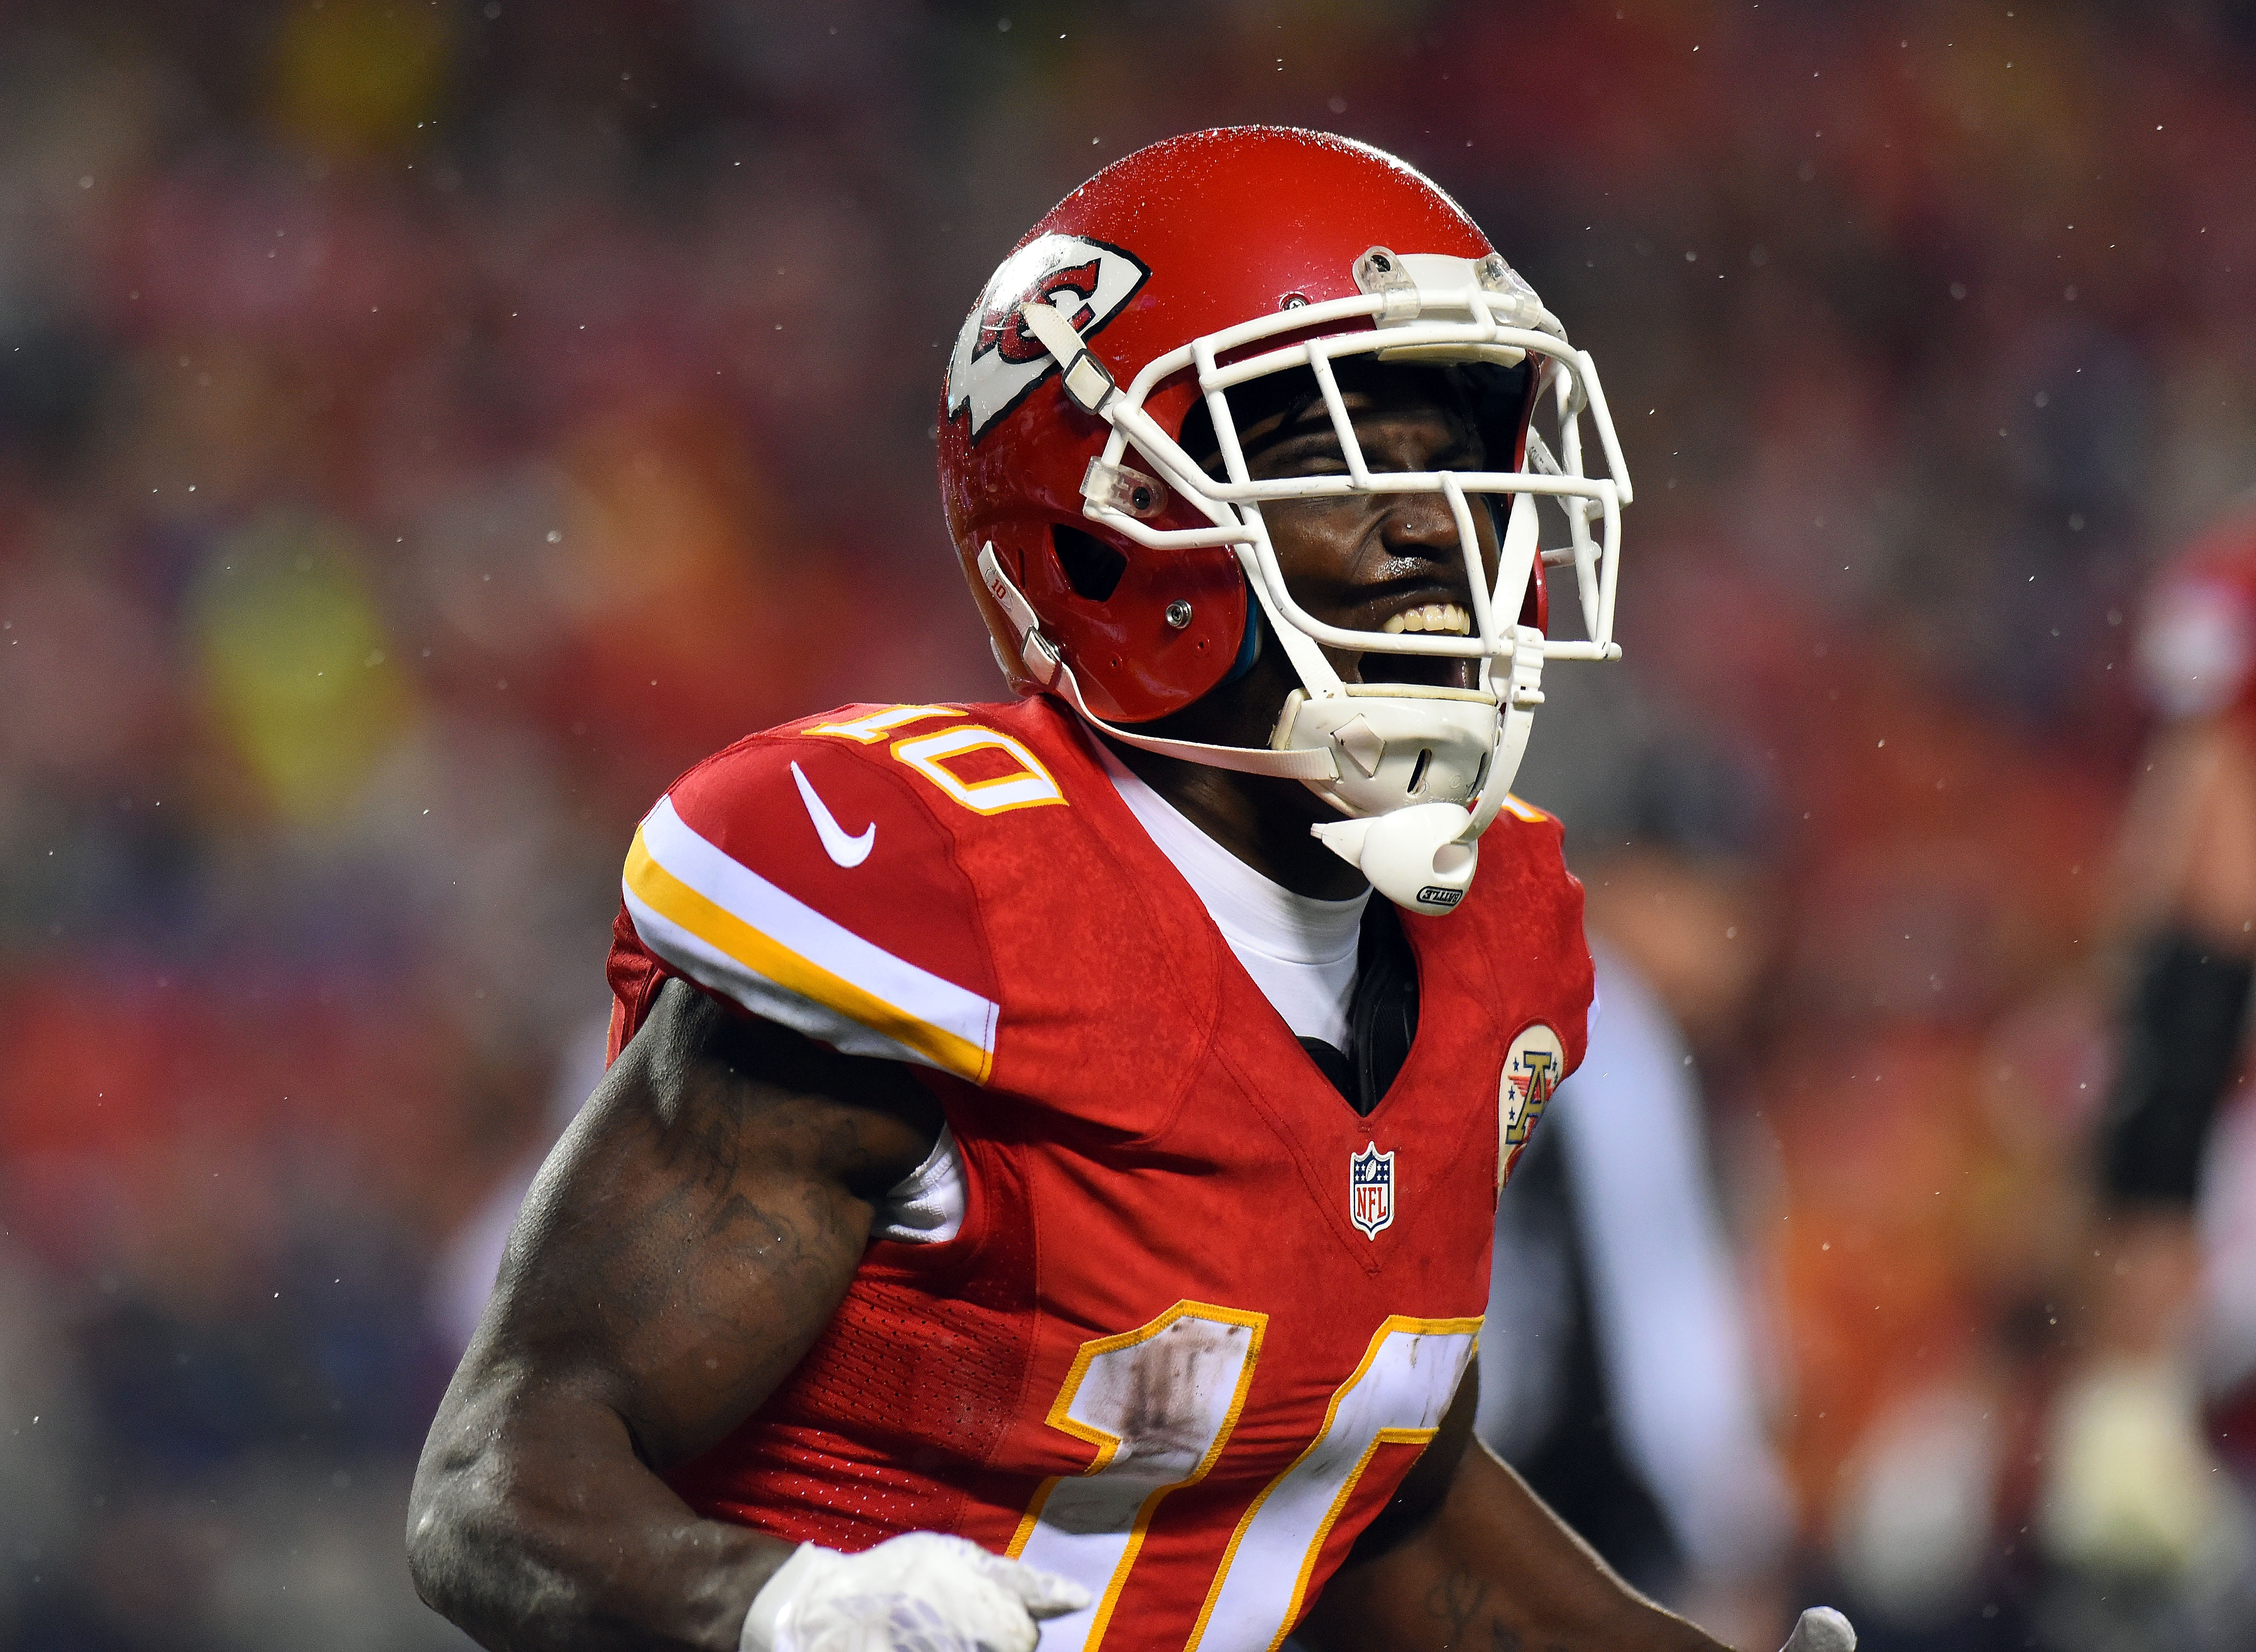 BetOnline Promo Code and Betting Offer for Bills vs Chiefs NFL Playoffs Game